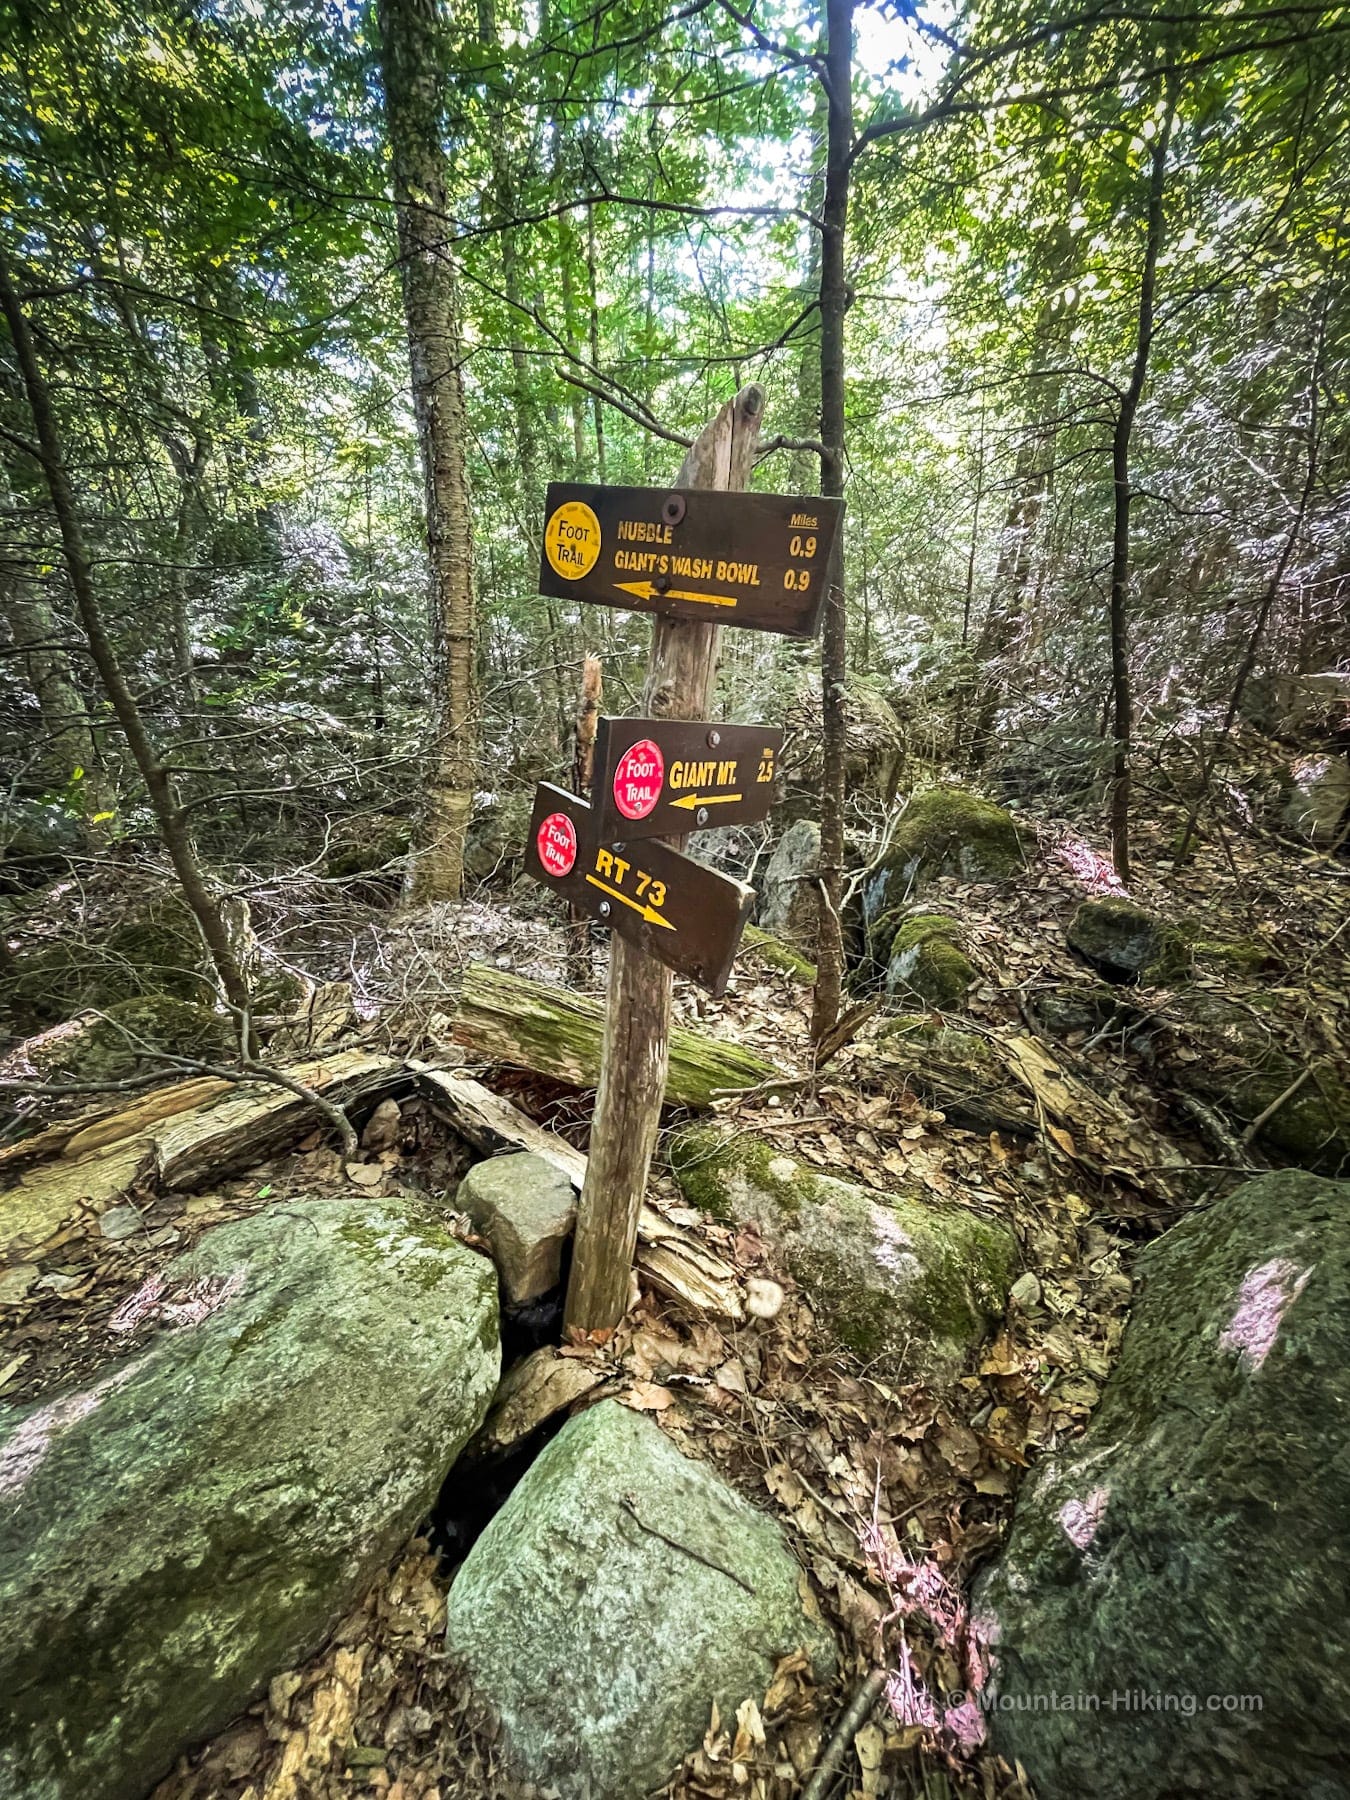 Trail signs in woods